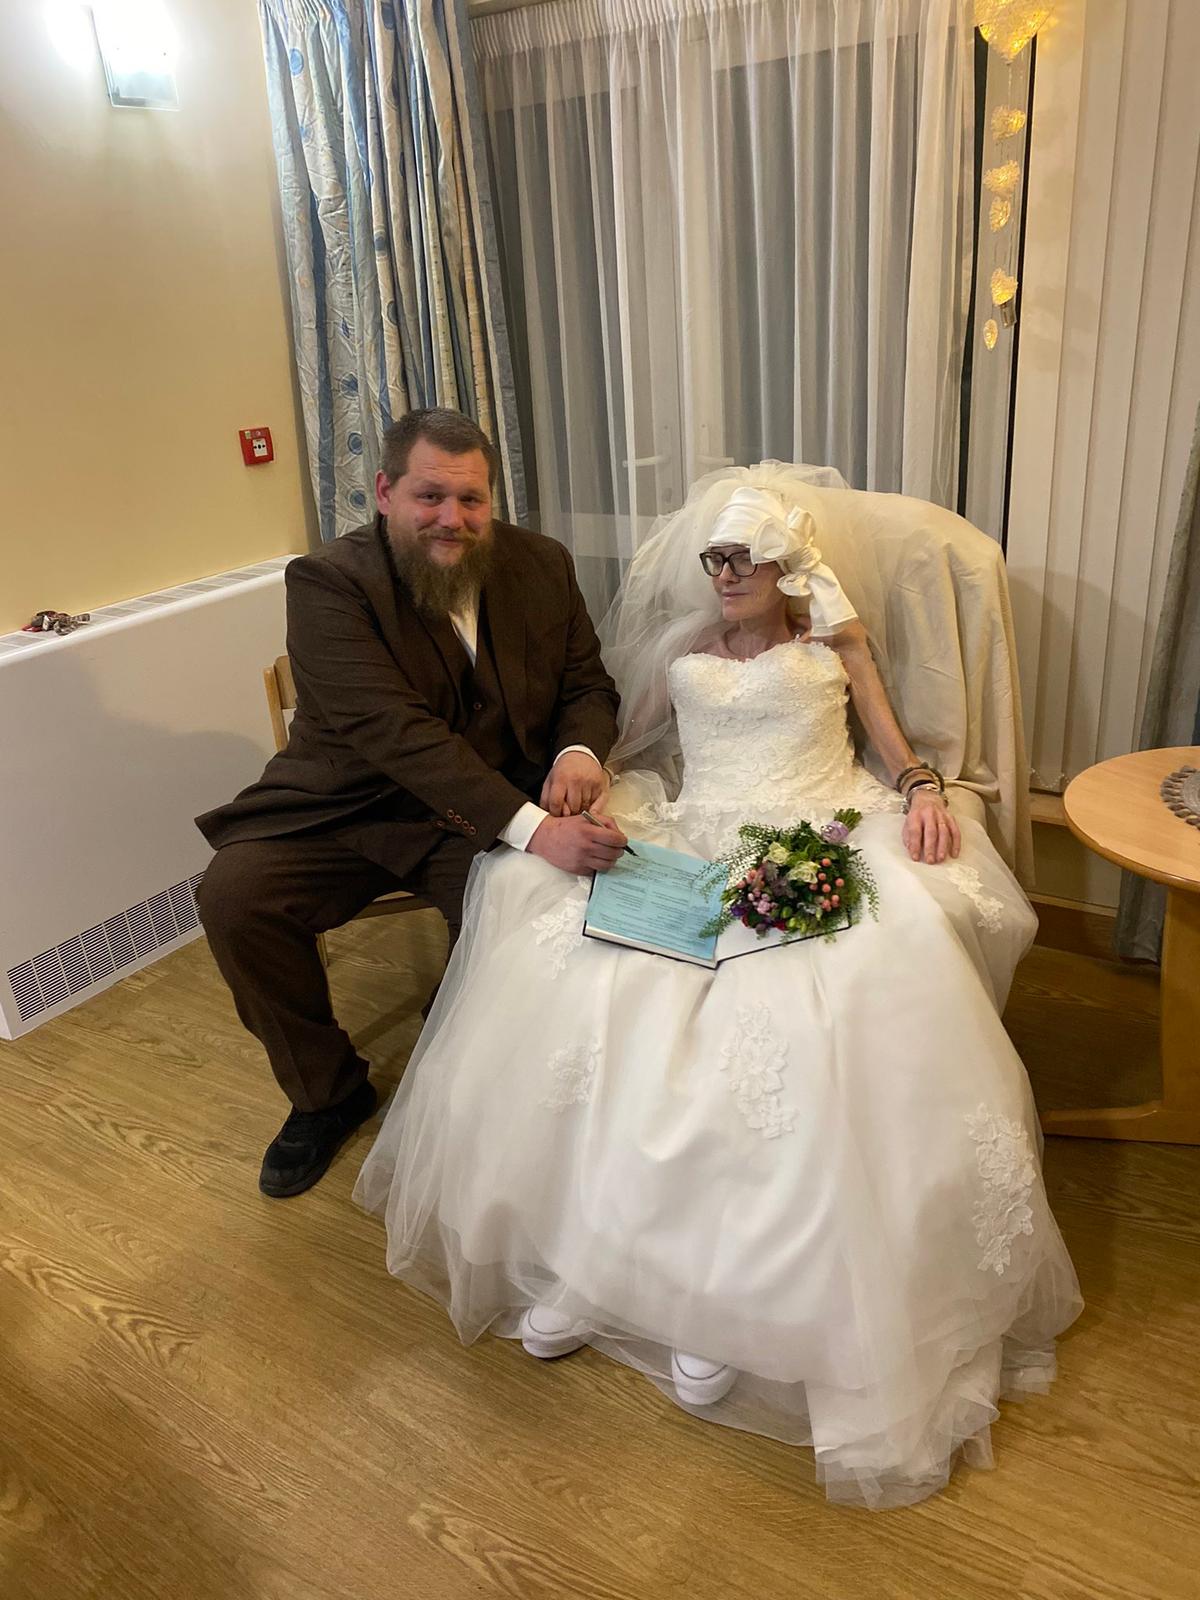 Ben and Jen Cooper got married in the hospice 2 days before she passed away. (Courtesy of <a href="https://twitter.com/bcoops_online">Ben Cooper</a>)